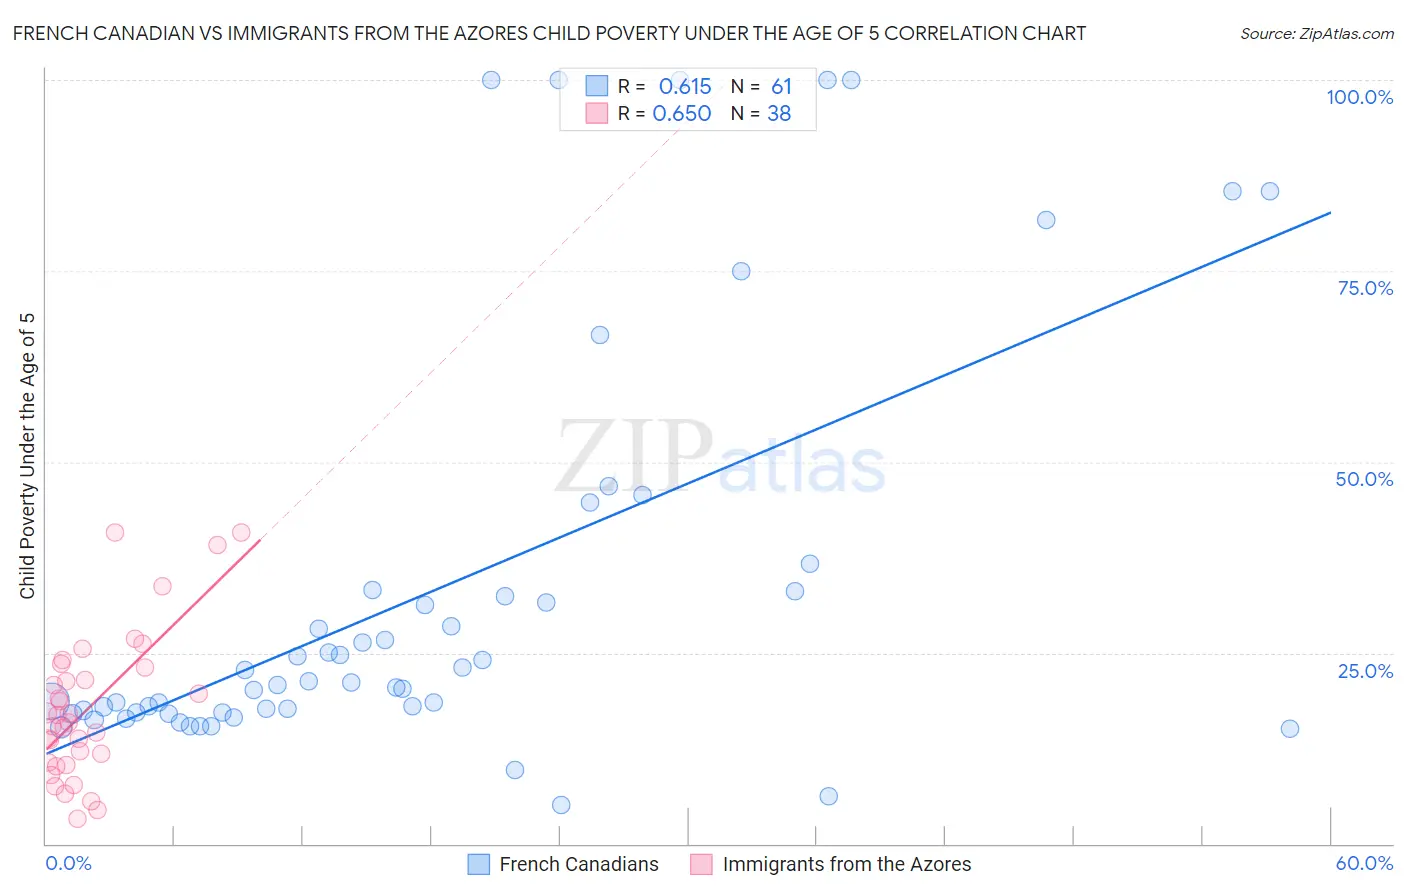 French Canadian vs Immigrants from the Azores Child Poverty Under the Age of 5